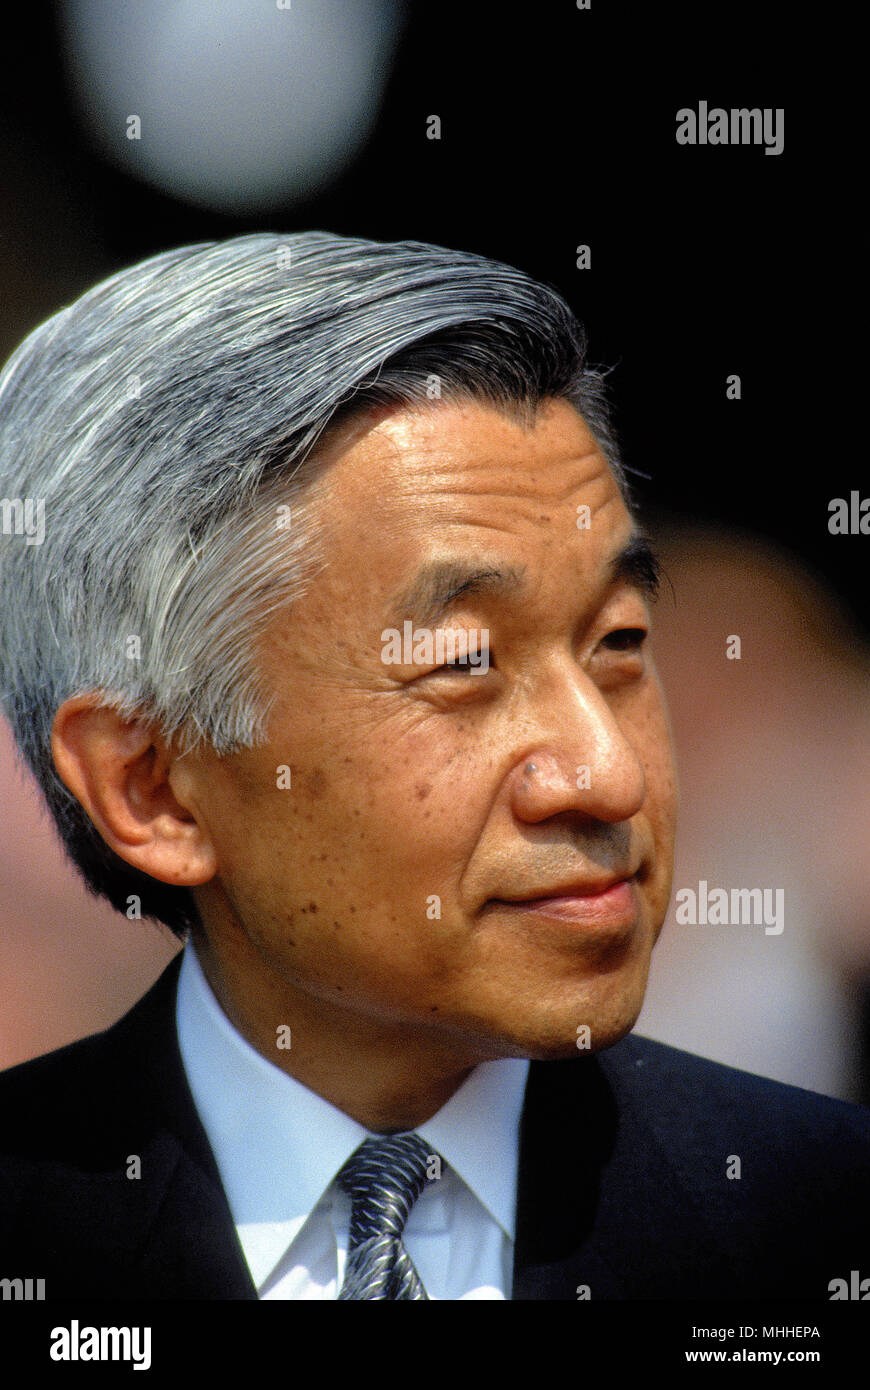 Washington, DC. 6-13-1994 Japanese Emperor Akihito speaks at the podium during the welcoming ceremony for his Official State Visit to the White House.  Akihito is the reigning Emperor of Japan, the 125th emperor of his line according to Japan's traditional order of succession. He acceded to the throne in 1989. Credit: Mark Reinstein Stock Photo